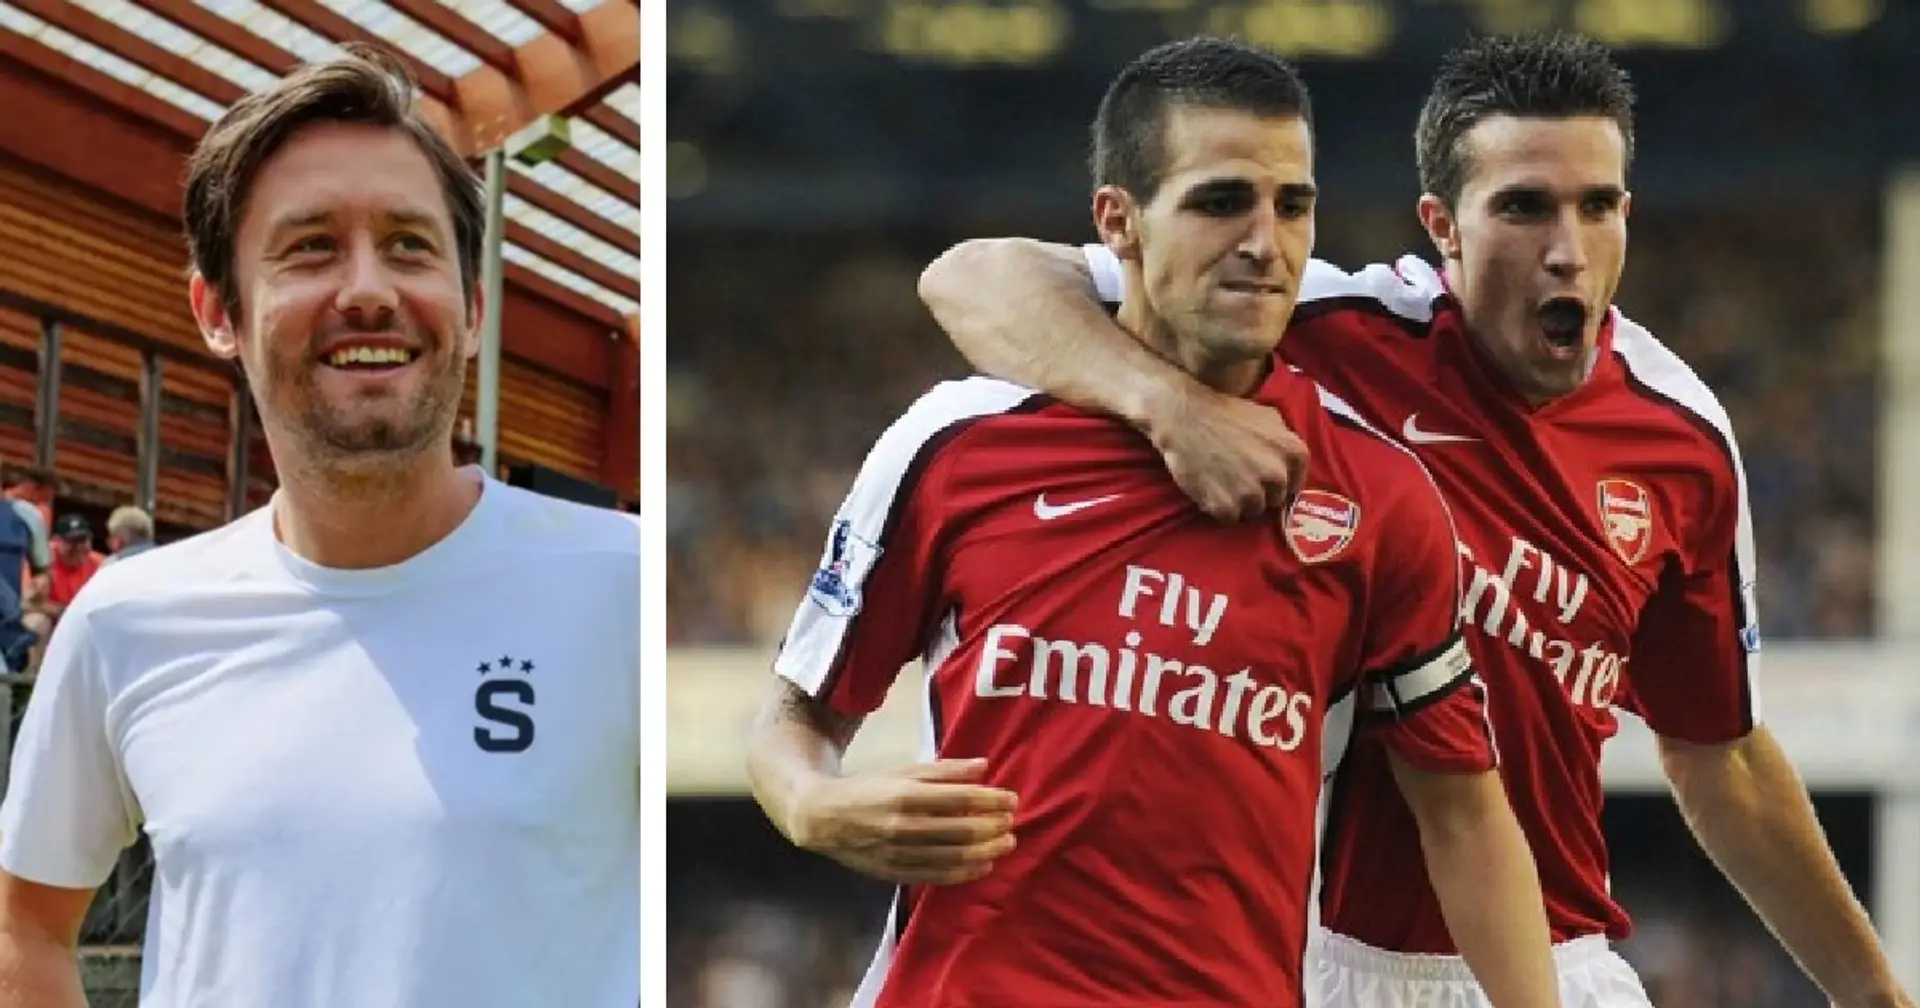 Tomas Rosicky reveals why Van Persie, Fabregas, others left Arsenal 